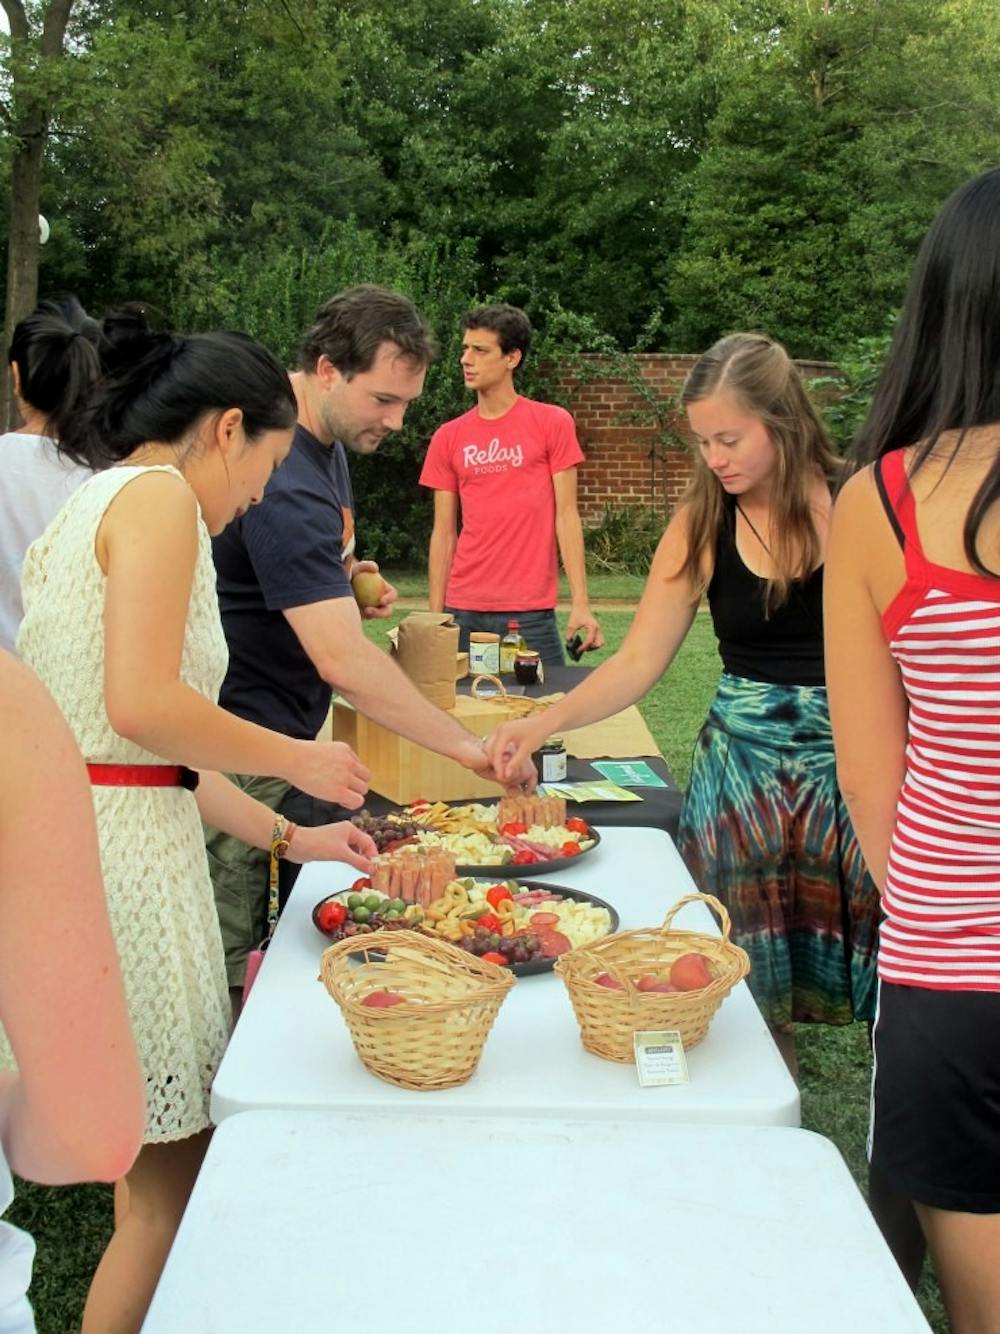 <p>Members of Slow Foods encourage students to eat local, organic food that will have positive impacts on their health and the surrounding community. </p>